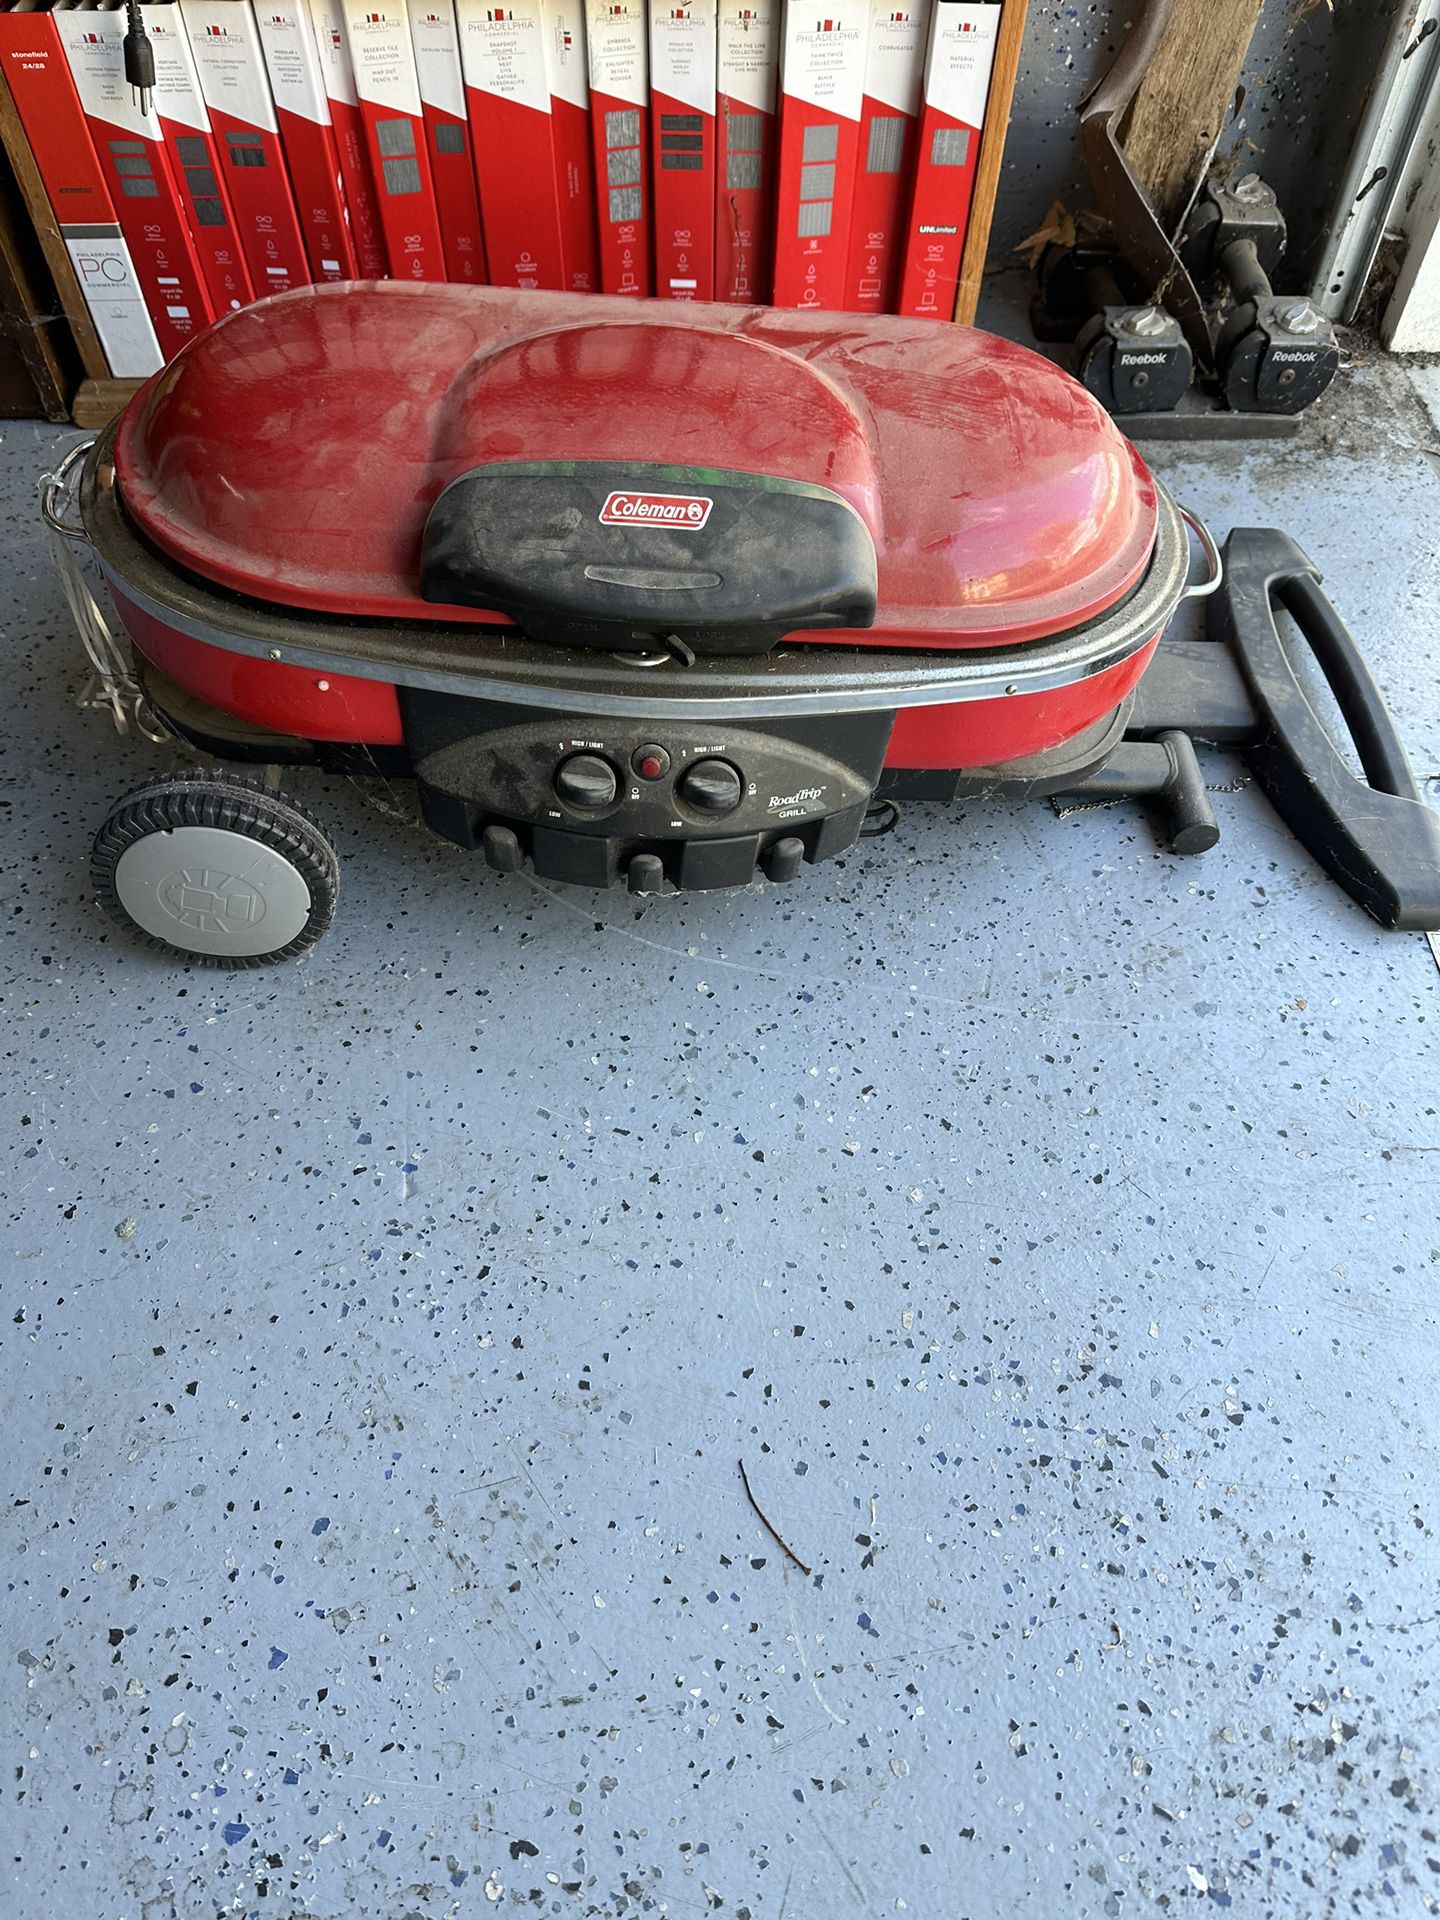 Portable gas Grill